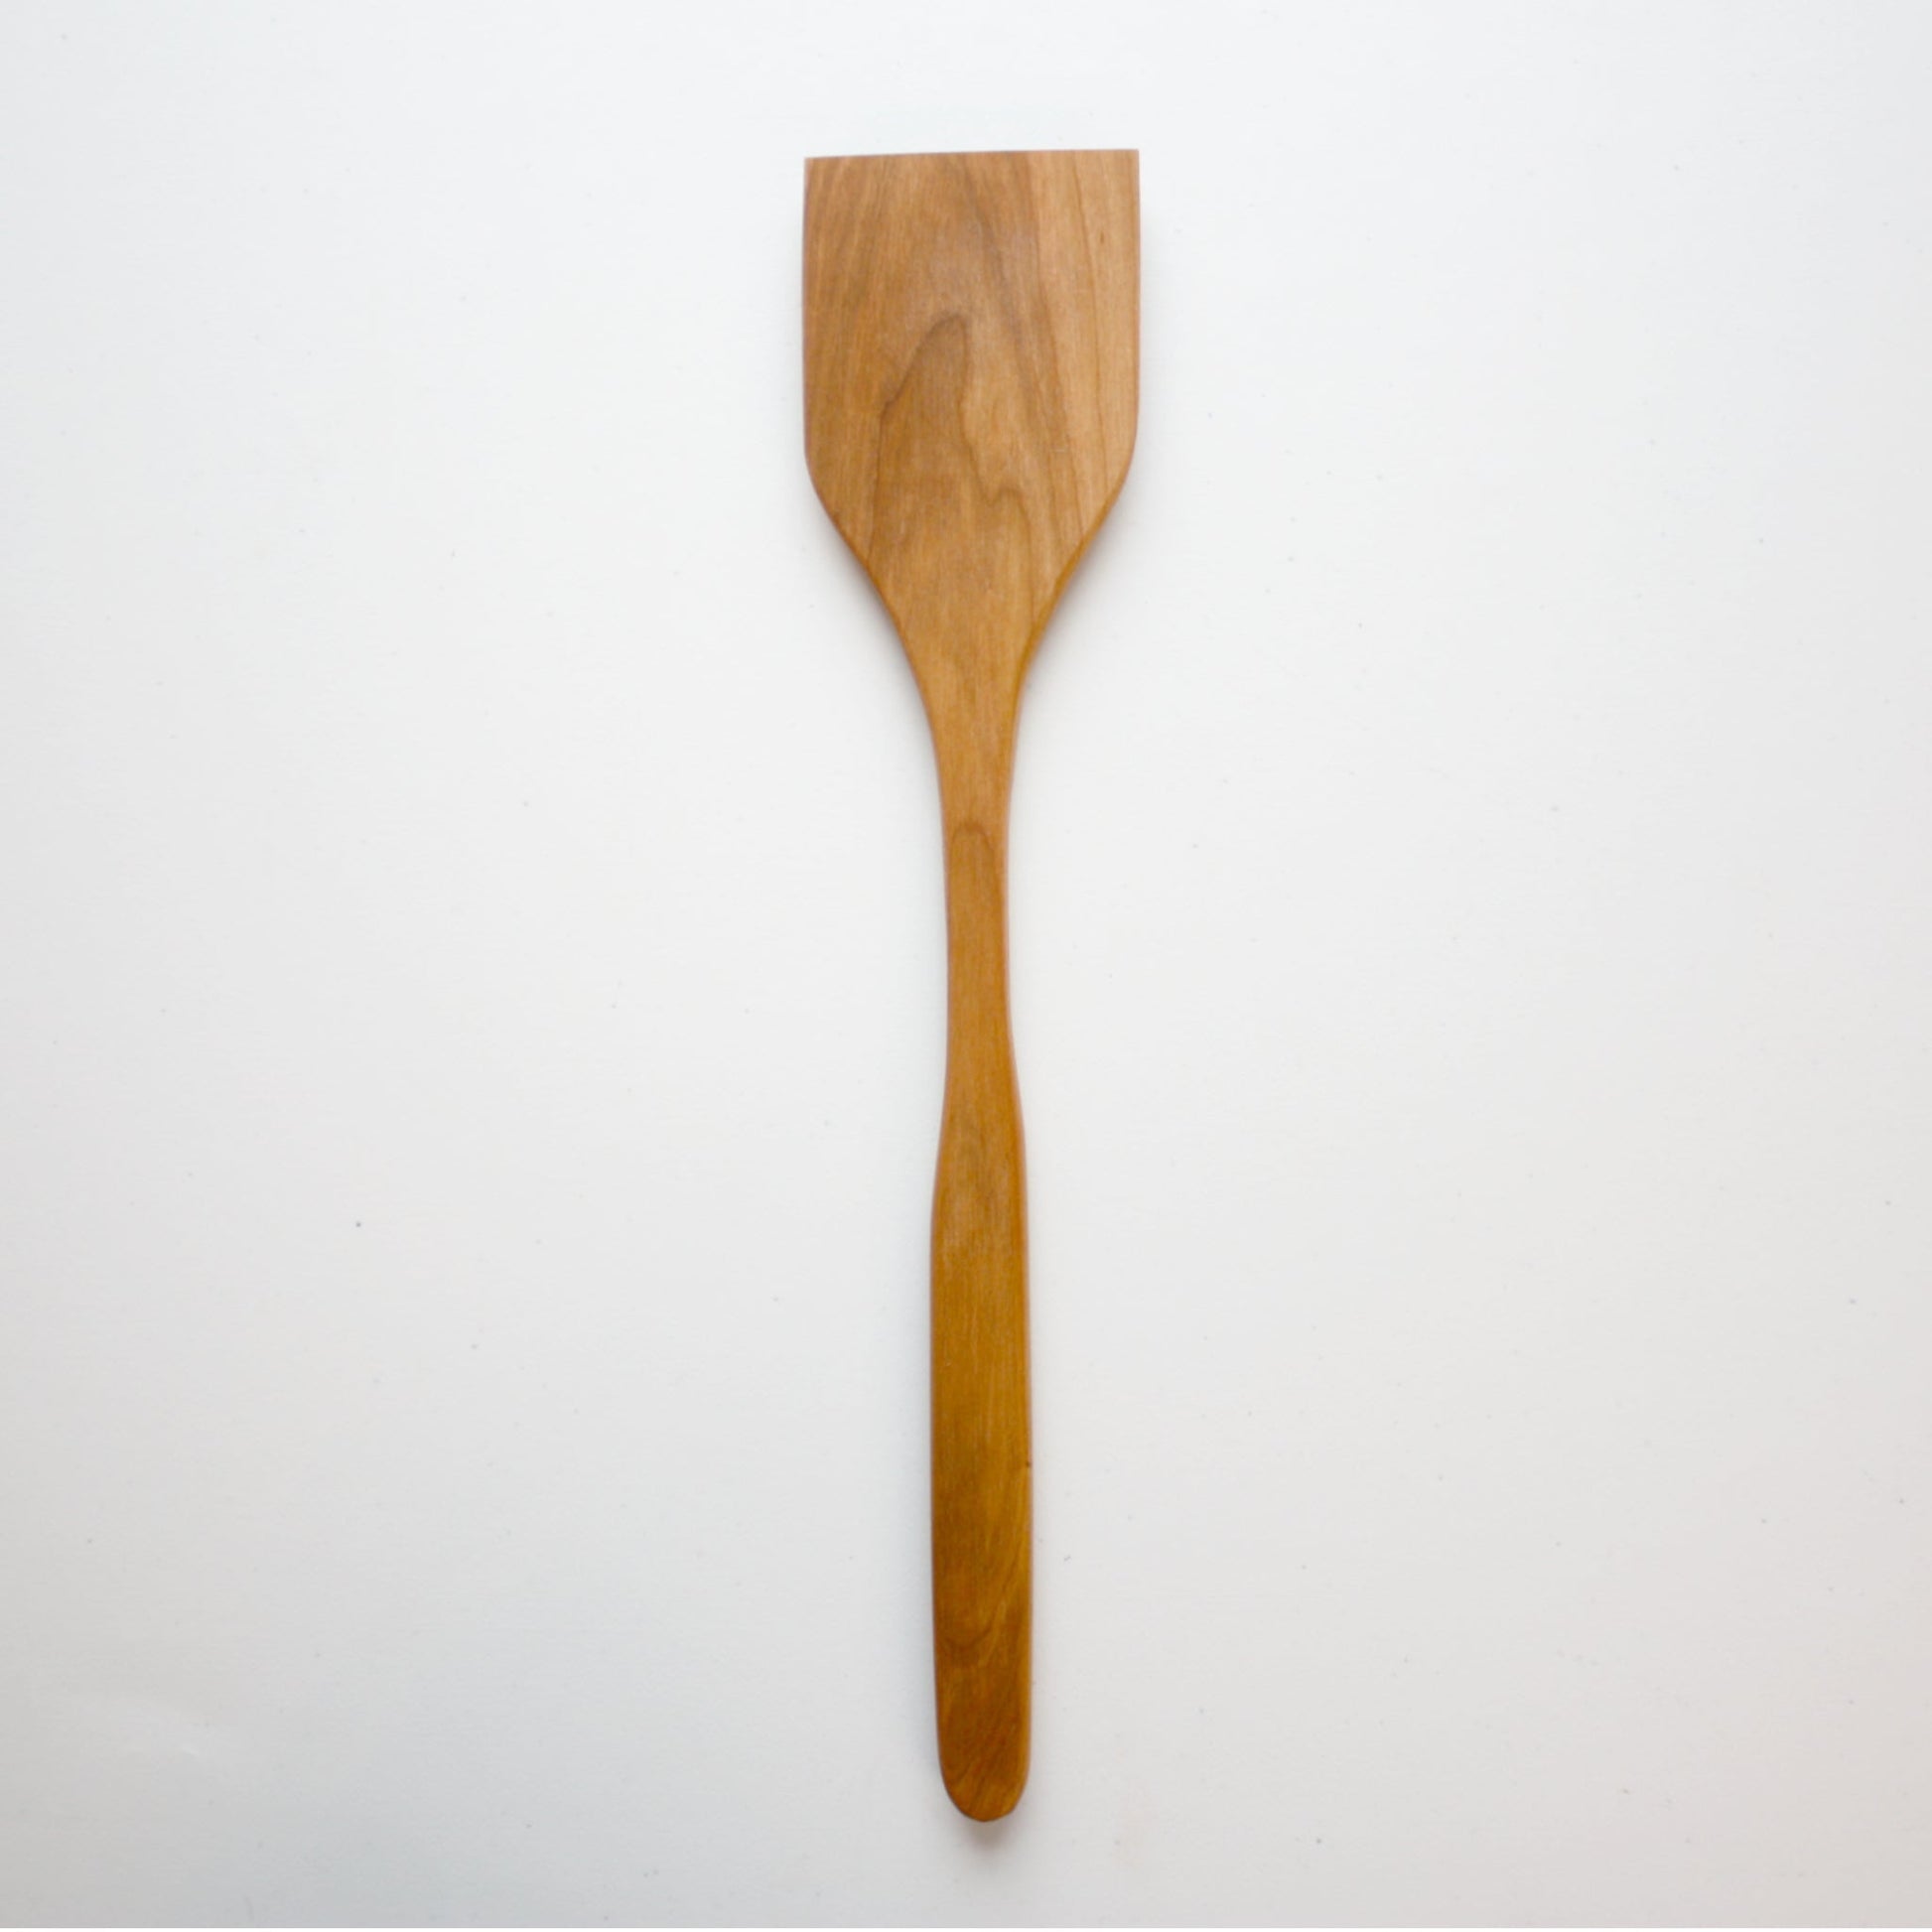 Wood Square Spatula - Made in the USA